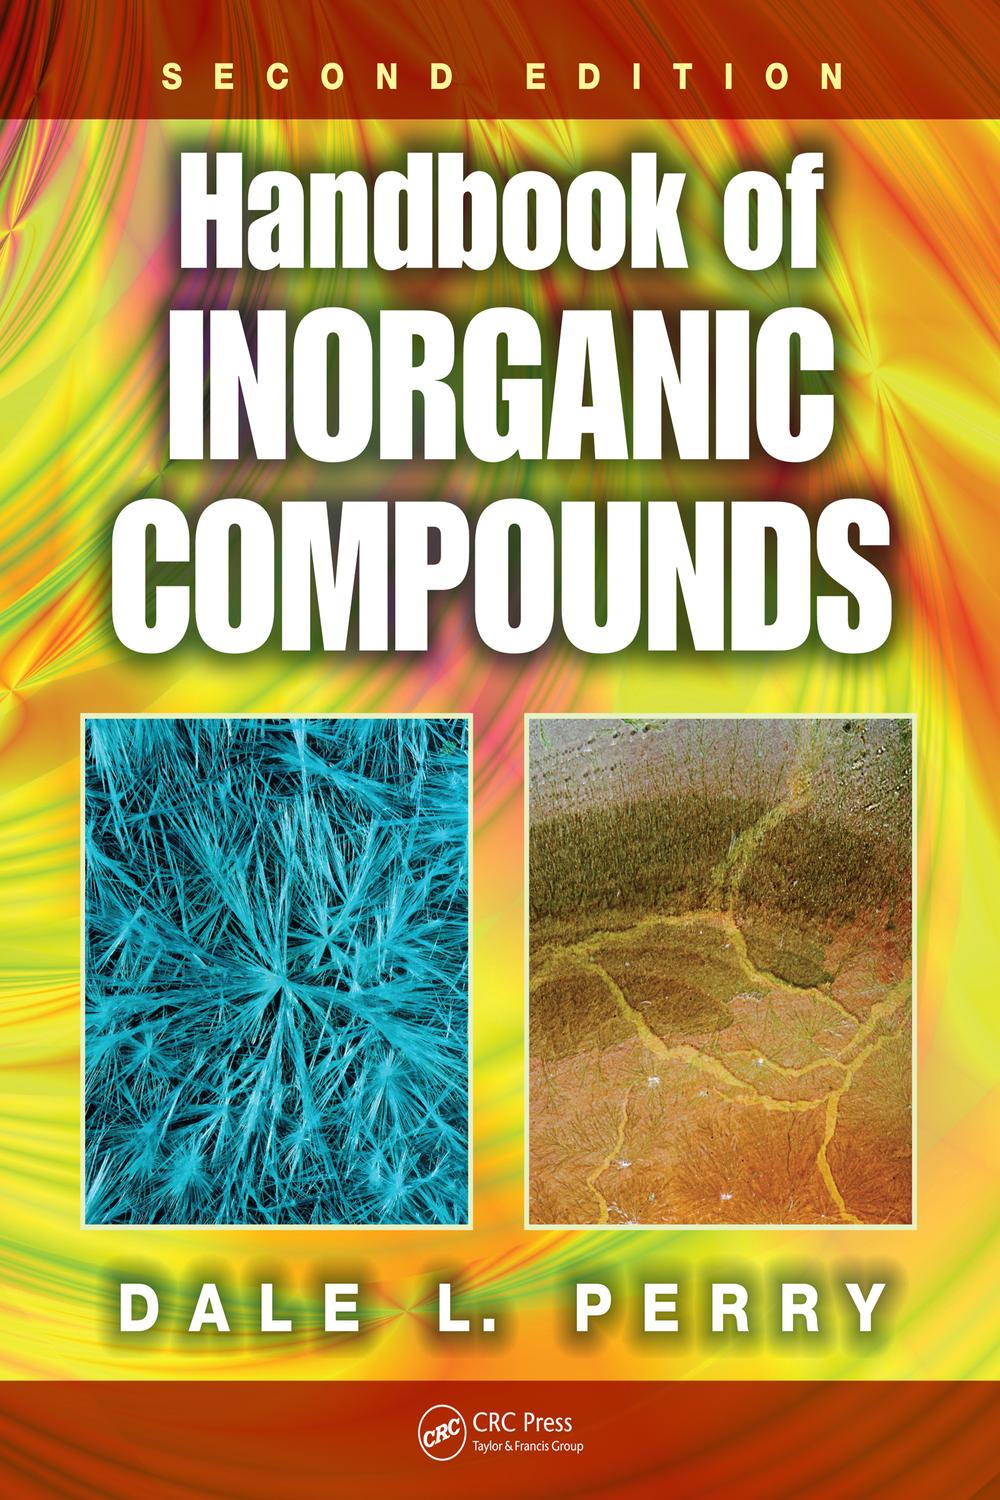 Handbook of Inorganic Compounds - Dale L. Perry